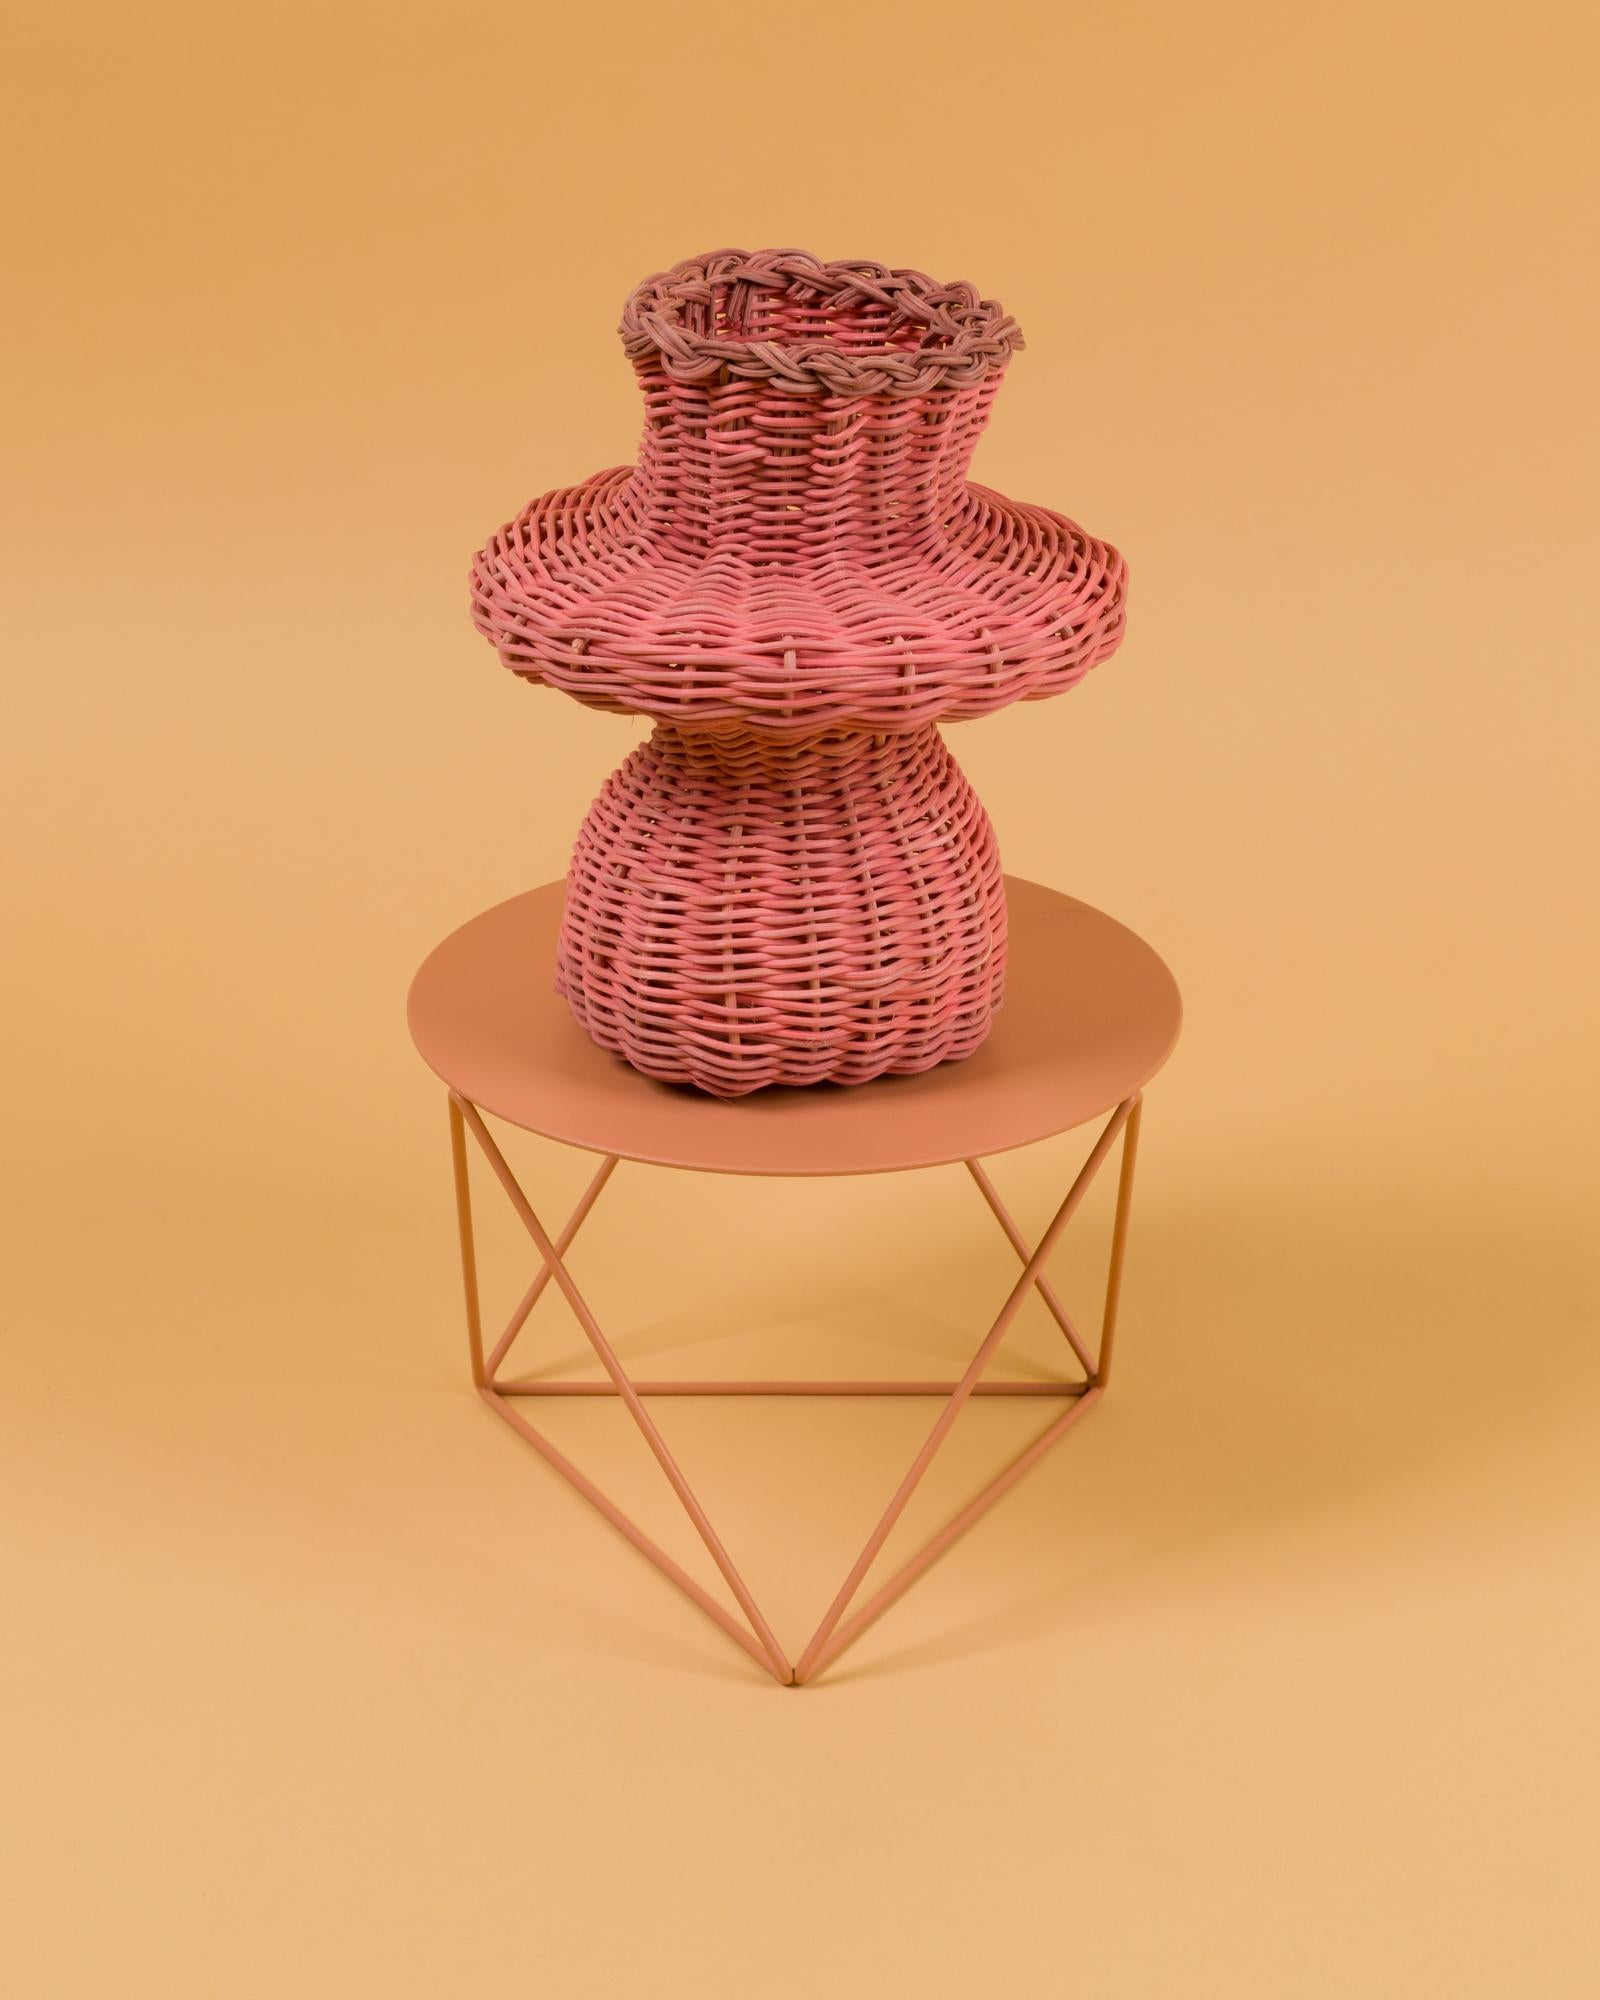 The Saturn woven vessel is a one-of-a-kind objet d’art, hand dyed and woven with reed in our Chicago studio. Inspired by forms in ancient Greek ceramics, the material language of this vessel brings together the rich craft history of weaving with 3